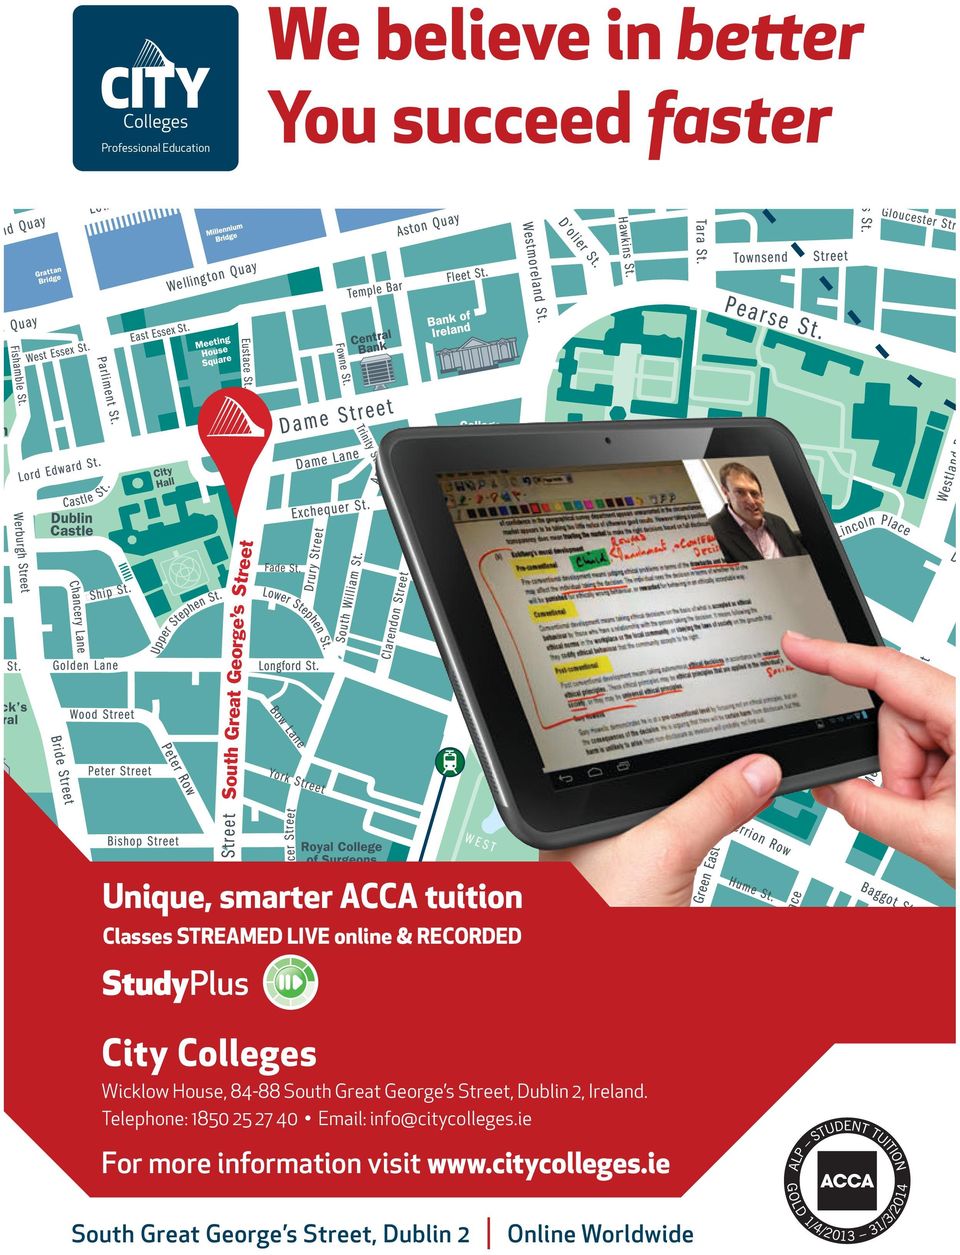 George s Street, Dublin 2, Ireland. Telephone: 1850 25 27 40 Email: info@citycolleges.